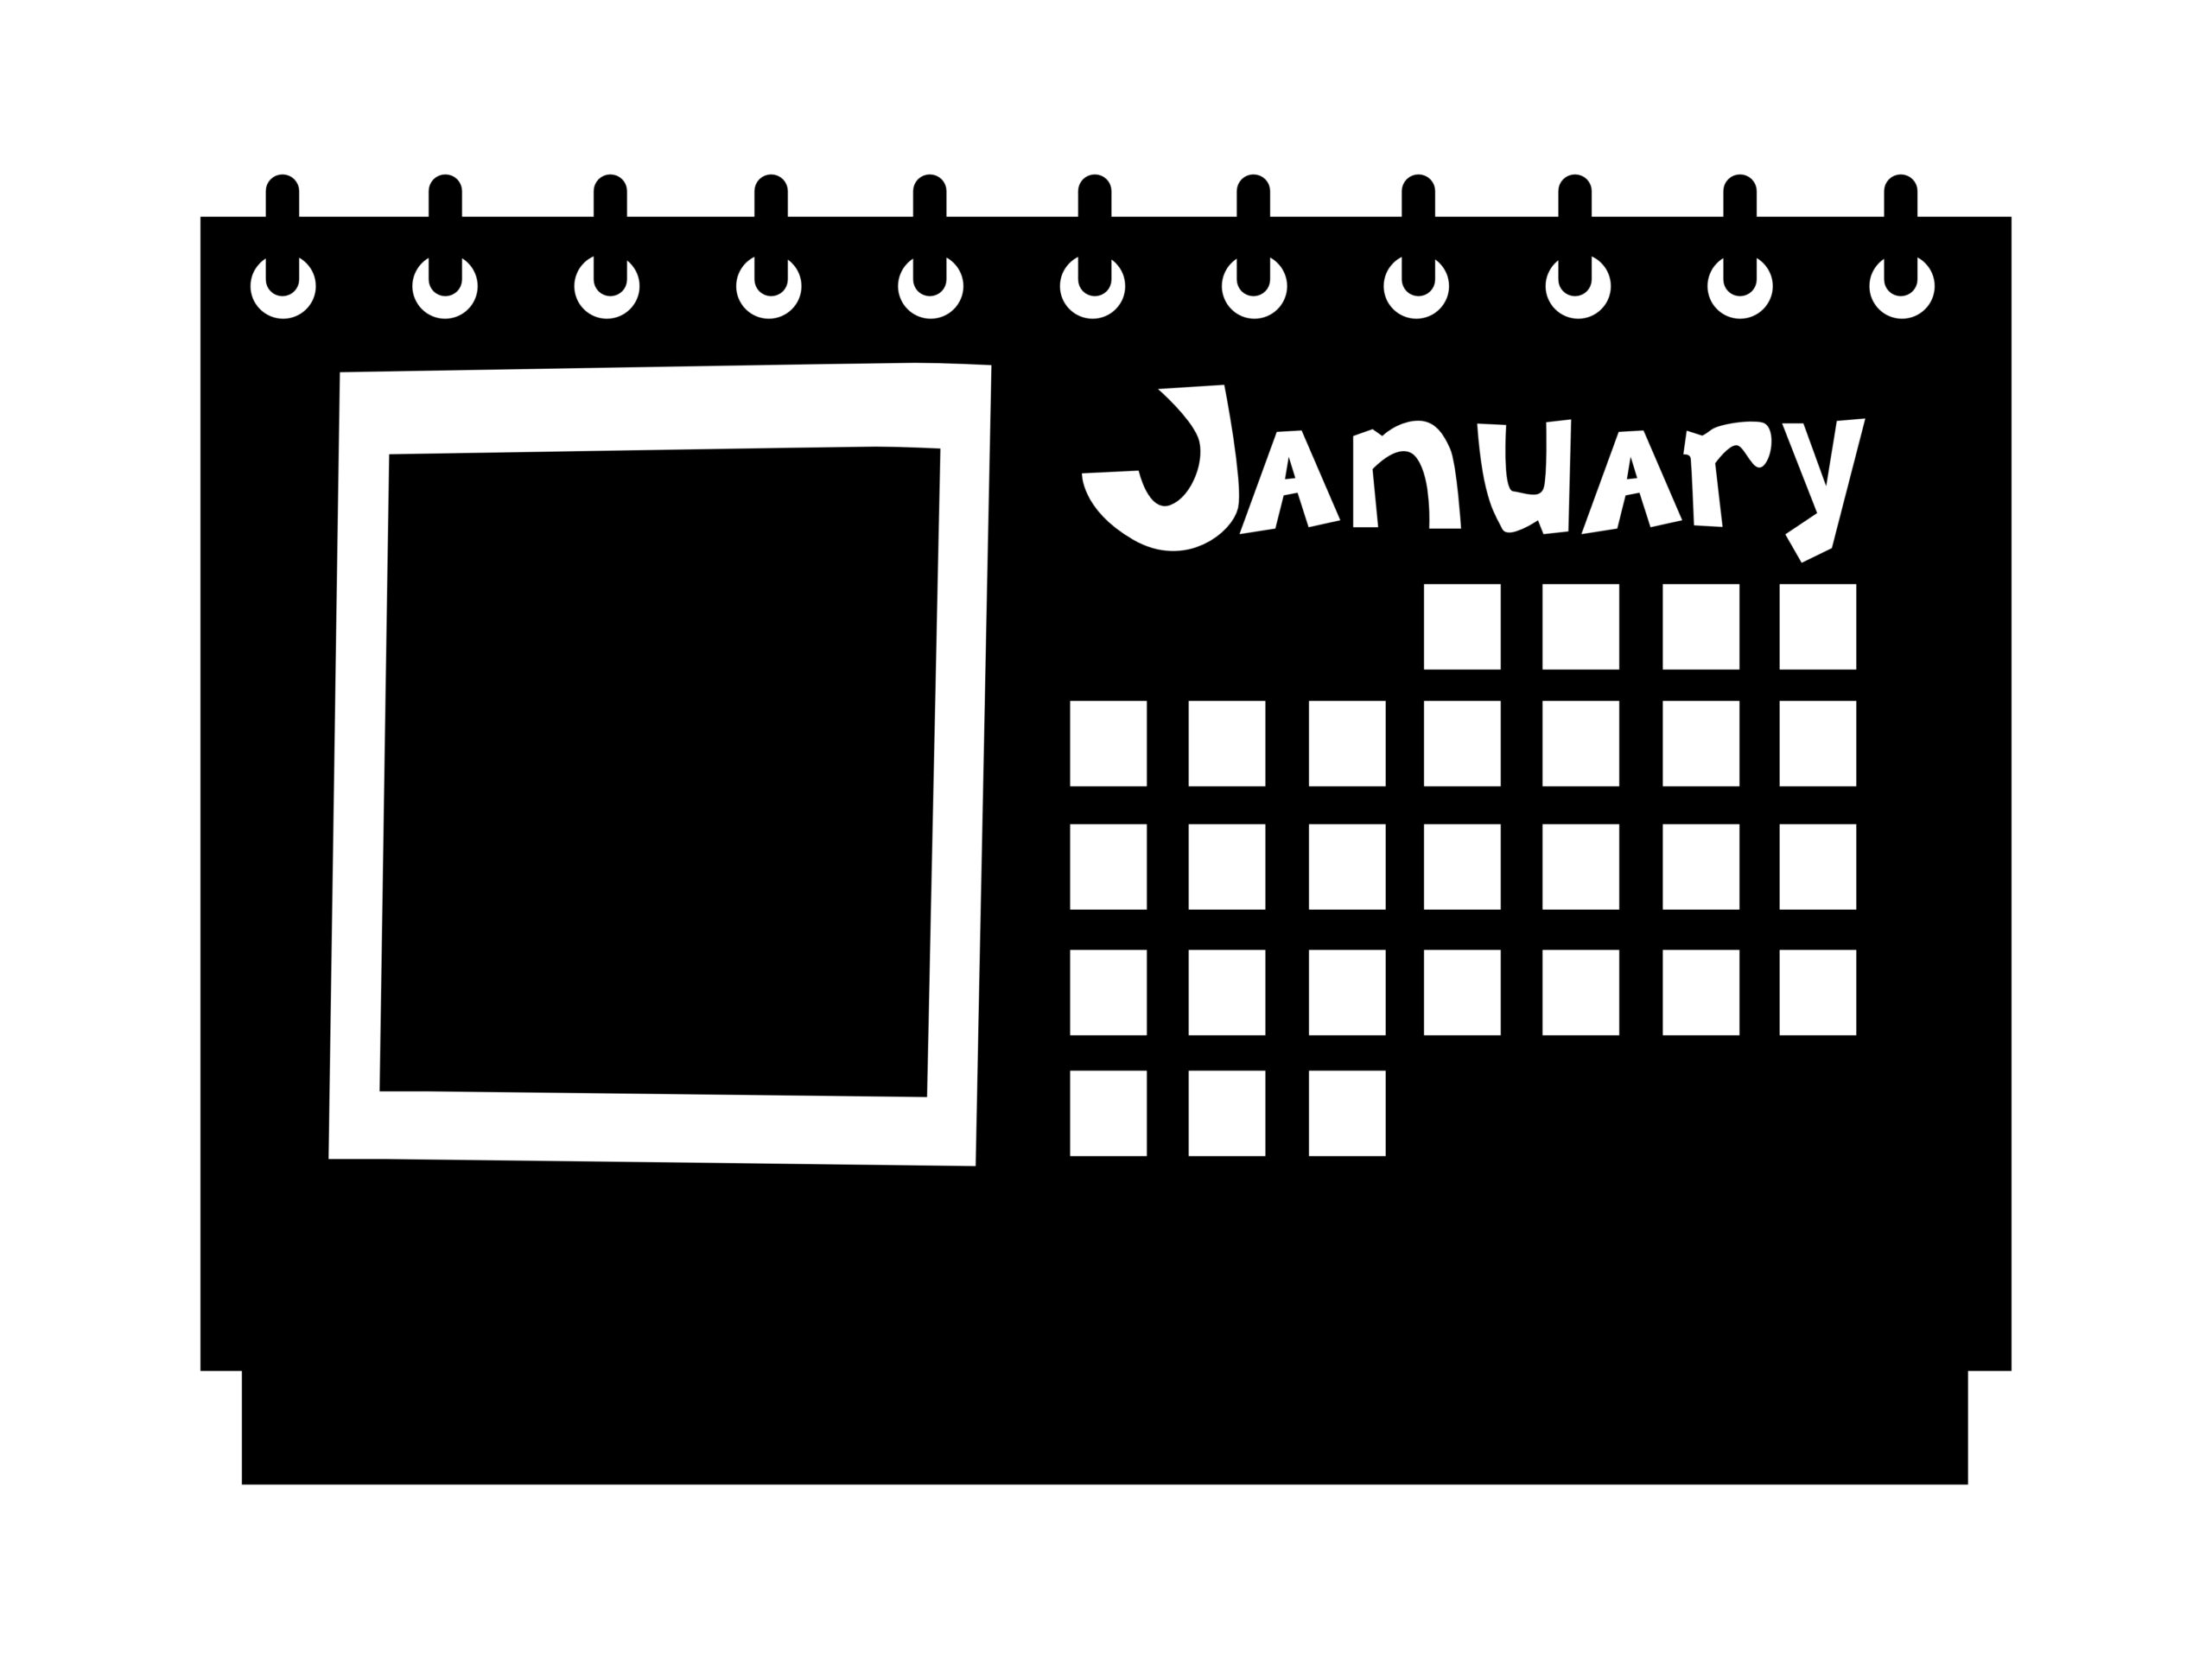 Black and white illustration of calendar turned to January.